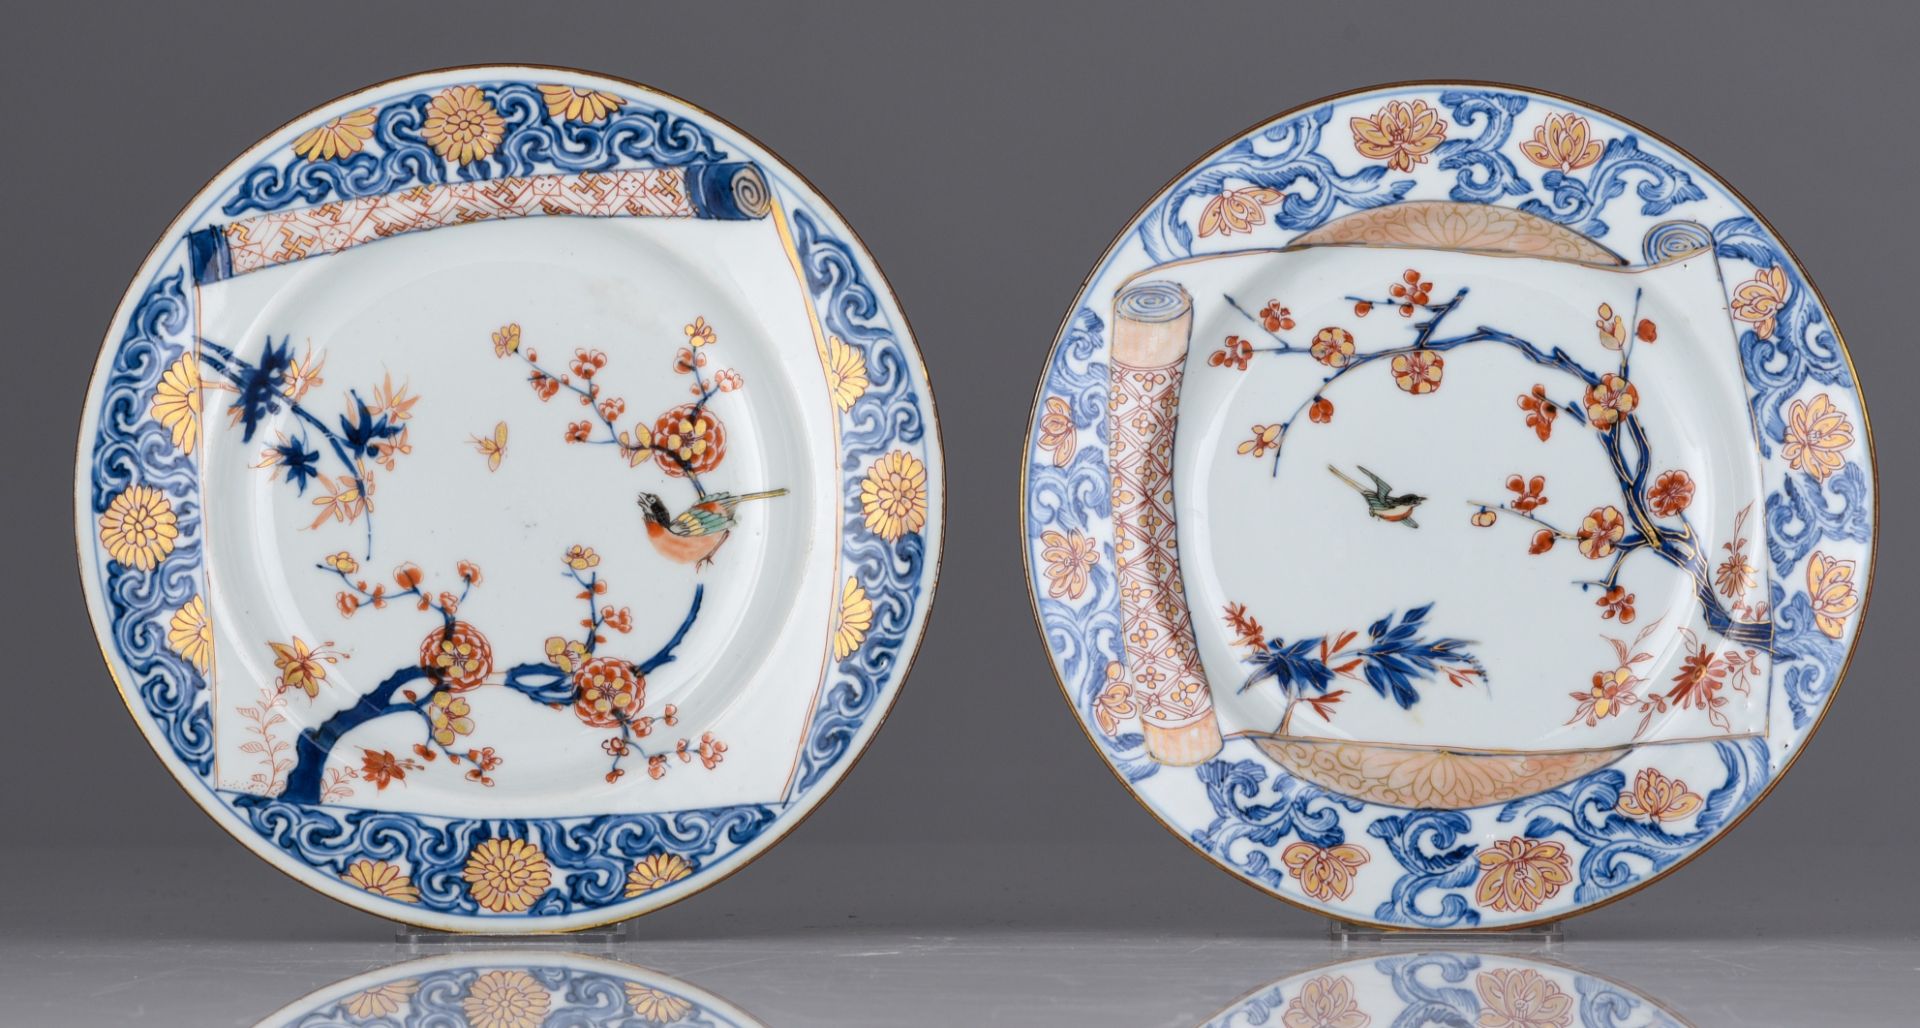 A collection of fine Chinese famille rose export porcelain dishes and a plate, 18thC, largest dimens - Image 3 of 10